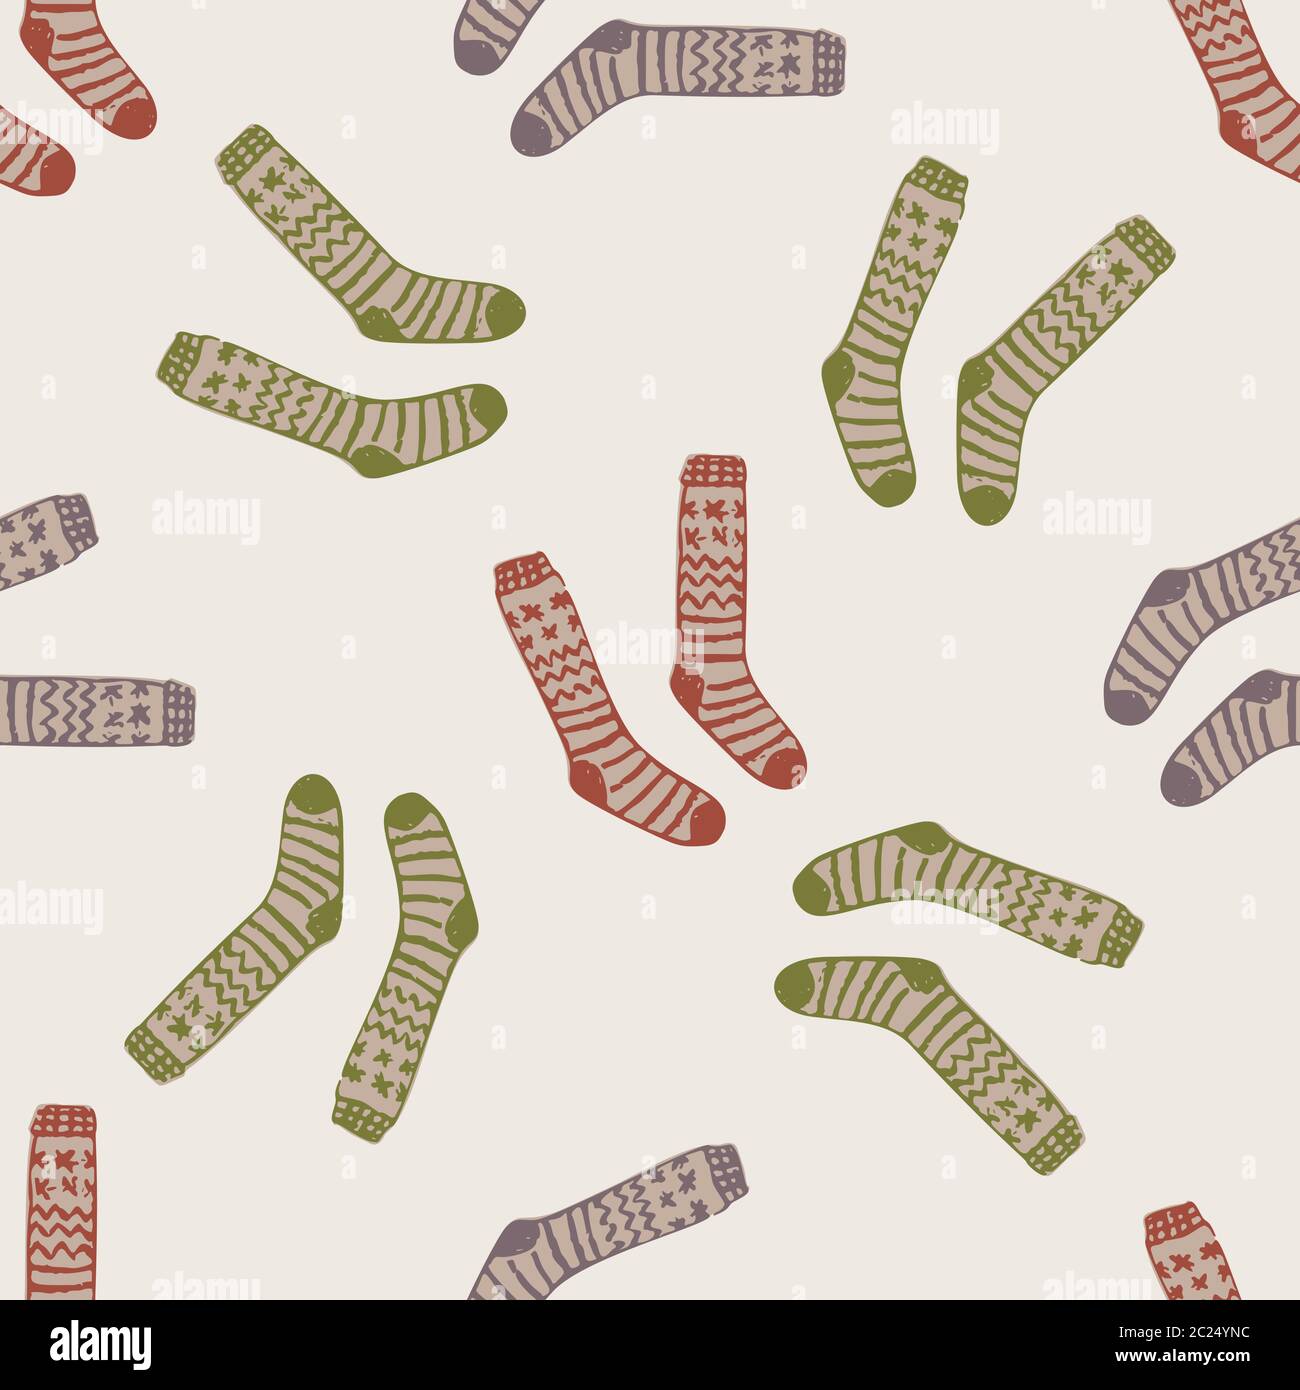 Knit sock Stock Vector Images - Page 2 - Alamy